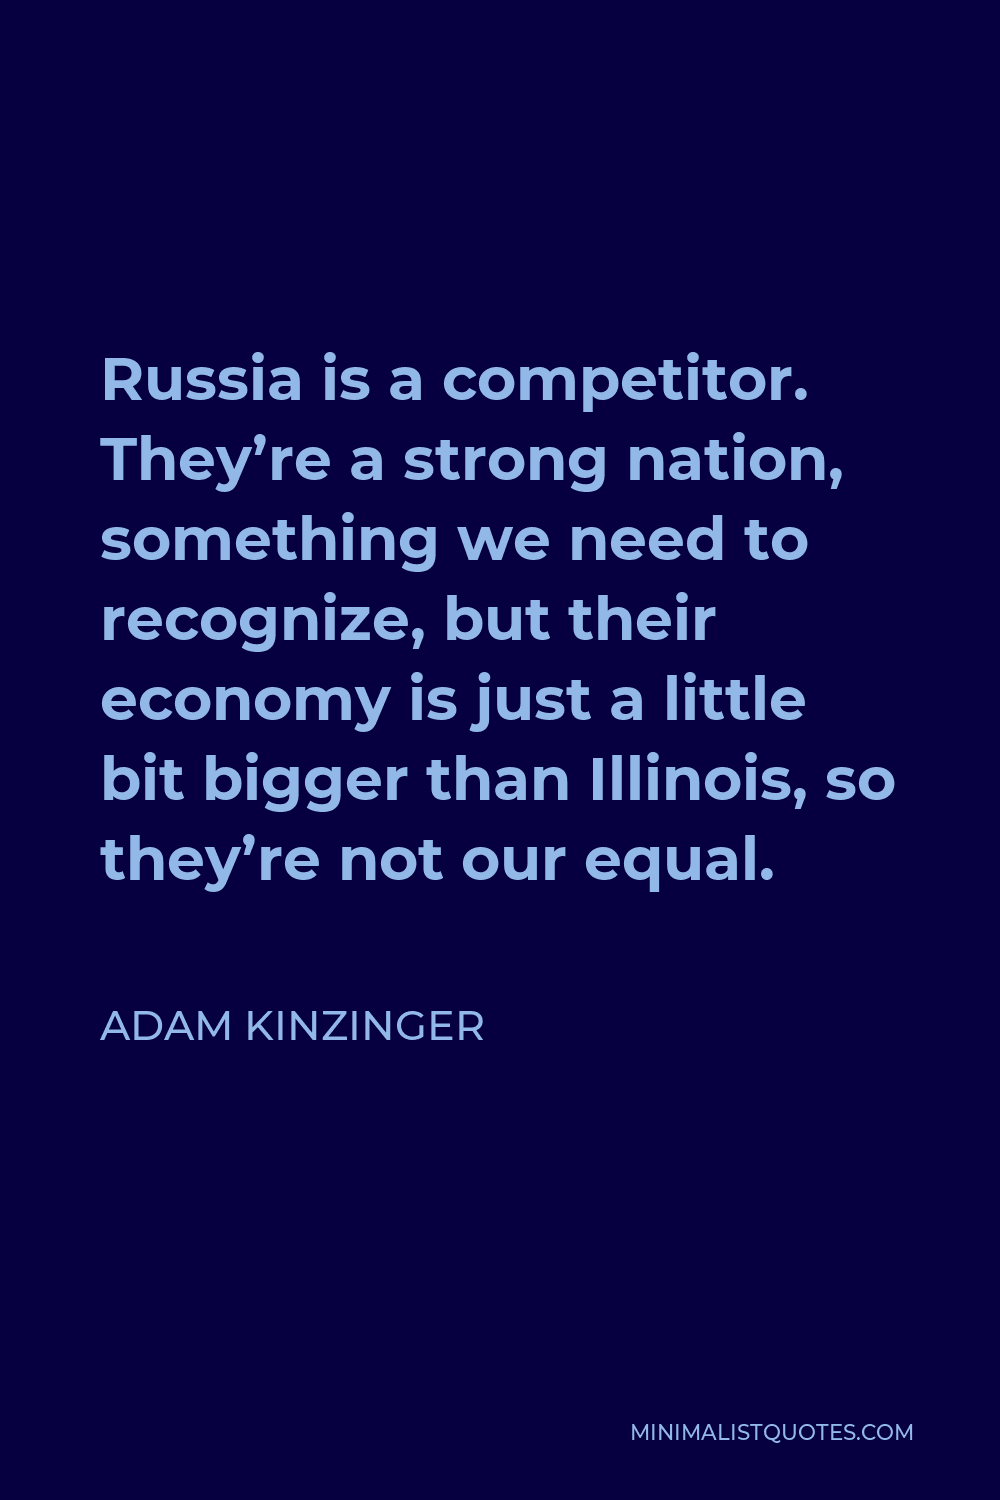 Adam Kinzinger Quote - Russia is a competitor. They’re a strong nation, something we need to recognize, but their economy is just a little bit bigger than Illinois, so they’re not our equal.